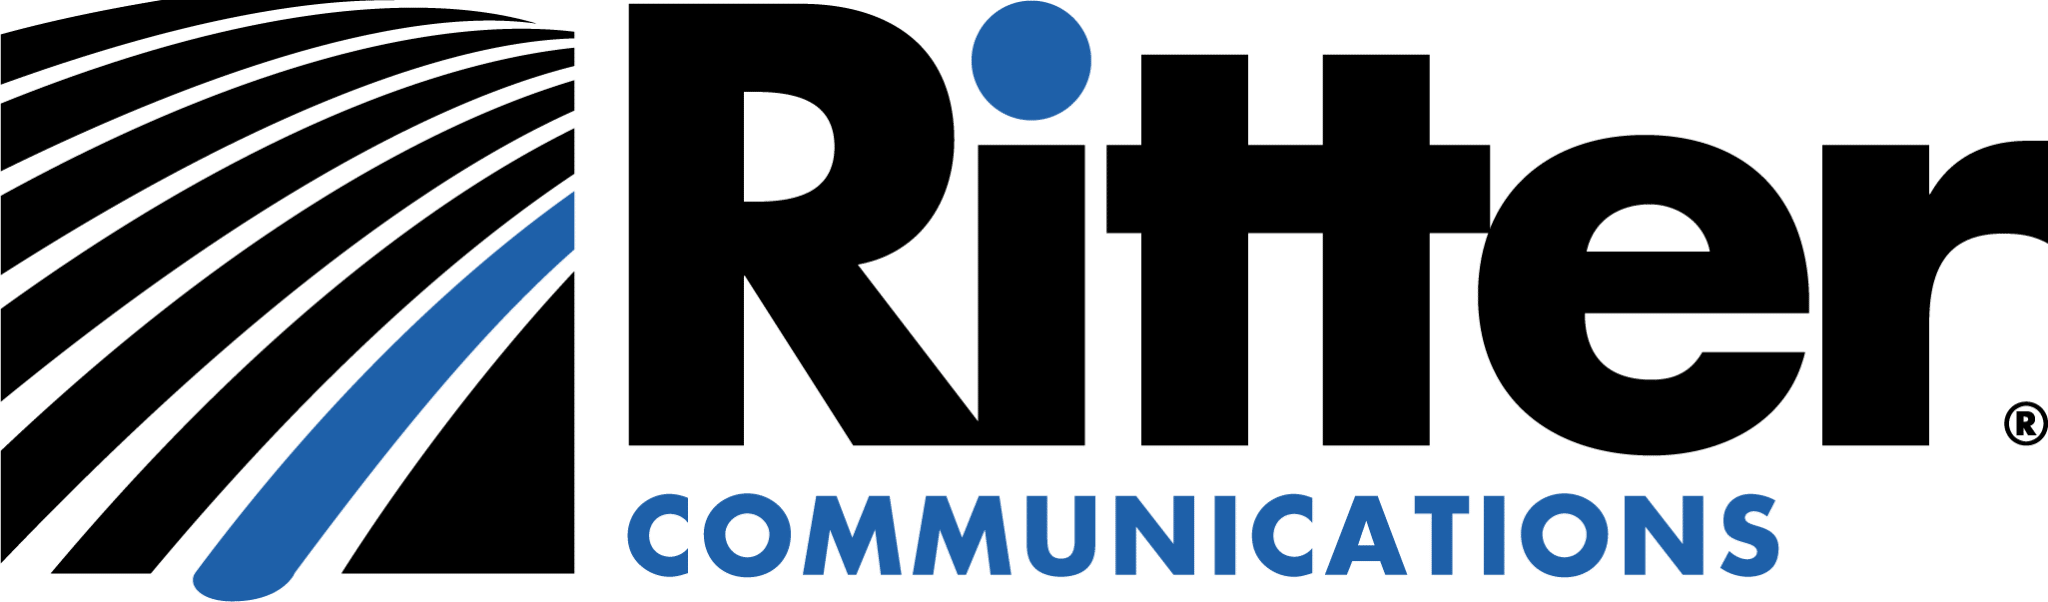 Ritter Communications Two Color Logo